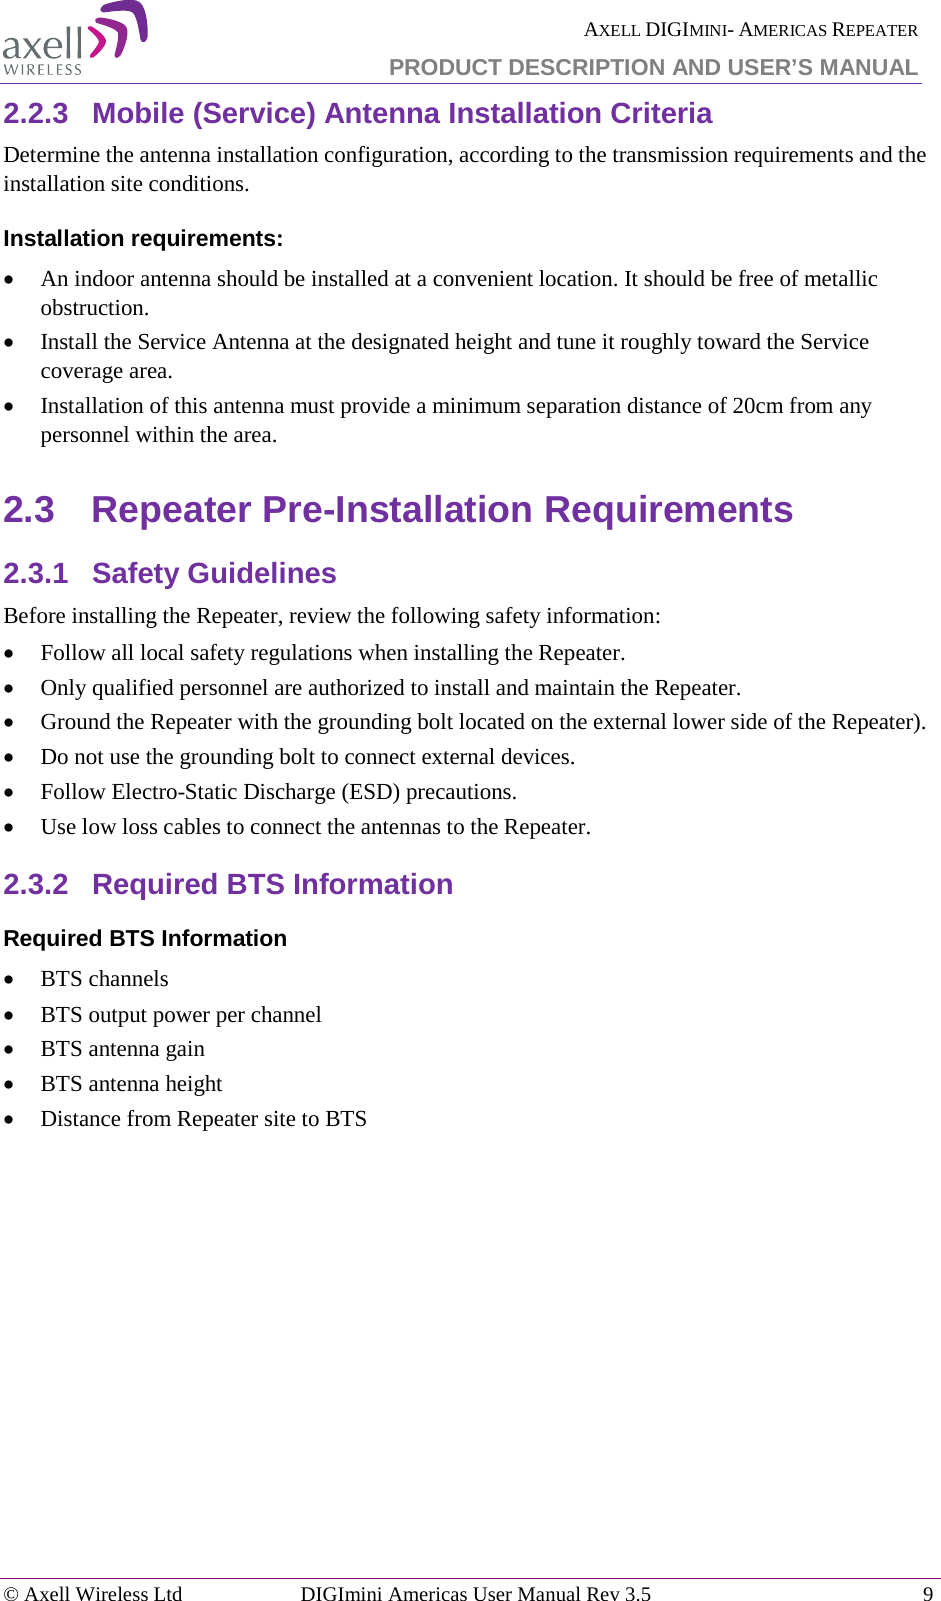  AXELL DIGIMINI- AMERICAS REPEATER PRODUCT DESCRIPTION AND USER’S MANUAL © Axell Wireless Ltd DIGImini Americas User Manual Rev 3.5  9  2.2.3  Mobile (Service) Antenna Installation Criteria Determine the antenna installation configuration, according to the transmission requirements and the installation site conditions. Installation requirements: • An indoor antenna should be installed at a convenient location. It should be free of metallic obstruction. • Install the Service Antenna at the designated height and tune it roughly toward the Service coverage area. • Installation of this antenna must provide a minimum separation distance of 20cm from any personnel within the area. 2.3  Repeater Pre-Installation Requirements 2.3.1  Safety Guidelines Before installing the Repeater, review the following safety information:  • Follow all local safety regulations when installing the Repeater. • Only qualified personnel are authorized to install and maintain the Repeater. • Ground the Repeater with the grounding bolt located on the external lower side of the Repeater). • Do not use the grounding bolt to connect external devices. • Follow Electro-Static Discharge (ESD) precautions. • Use low loss cables to connect the antennas to the Repeater. 2.3.2  Required BTS Information Required BTS Information • BTS channels • BTS output power per channel • BTS antenna gain • BTS antenna height  • Distance from Repeater site to BTS   